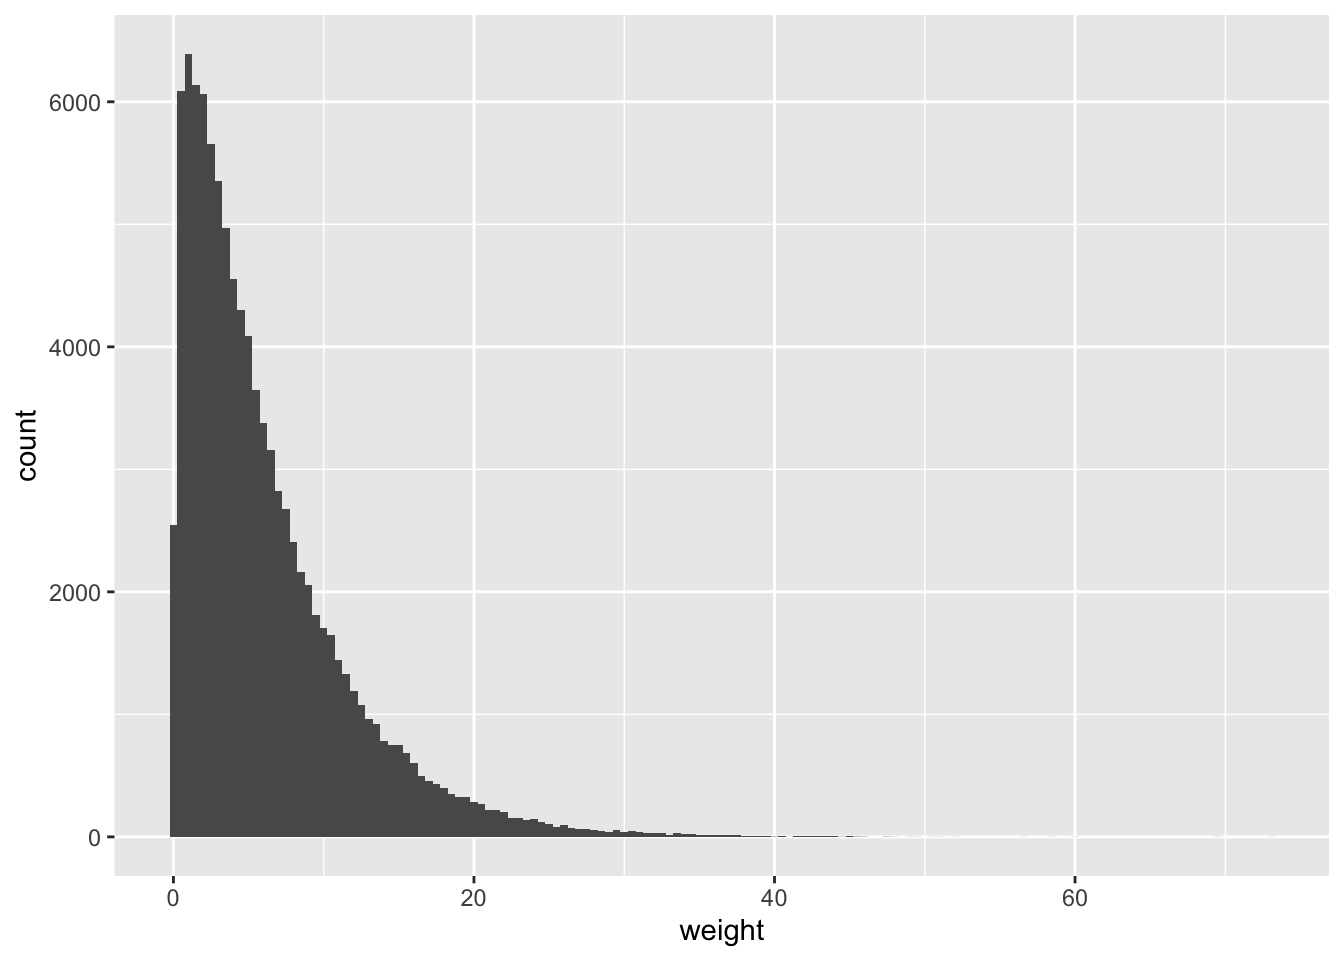 A simulated distribution of FedEx package weights.